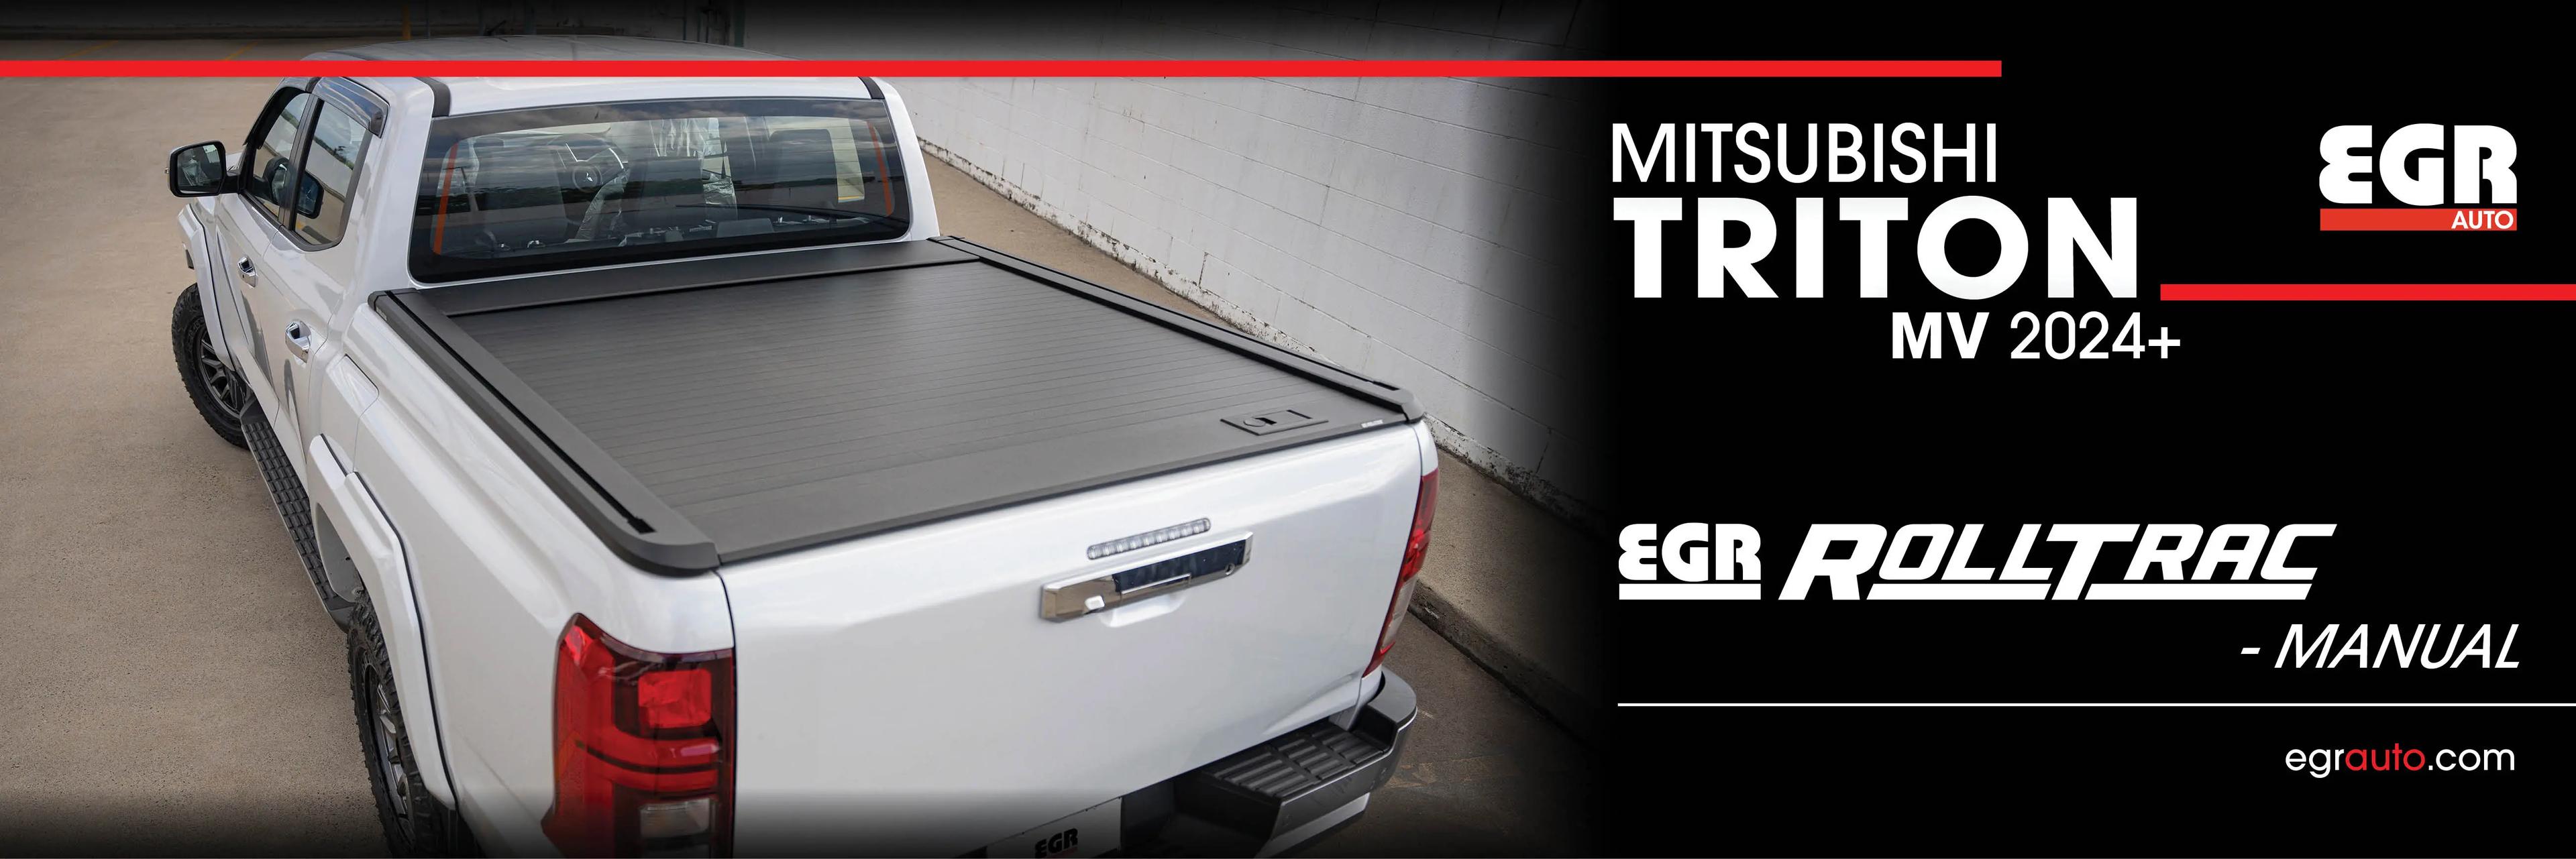 Promo banner - Click here for new EGR Rolltrac Manual available now for the Mitsubishi Triton MV 2024.